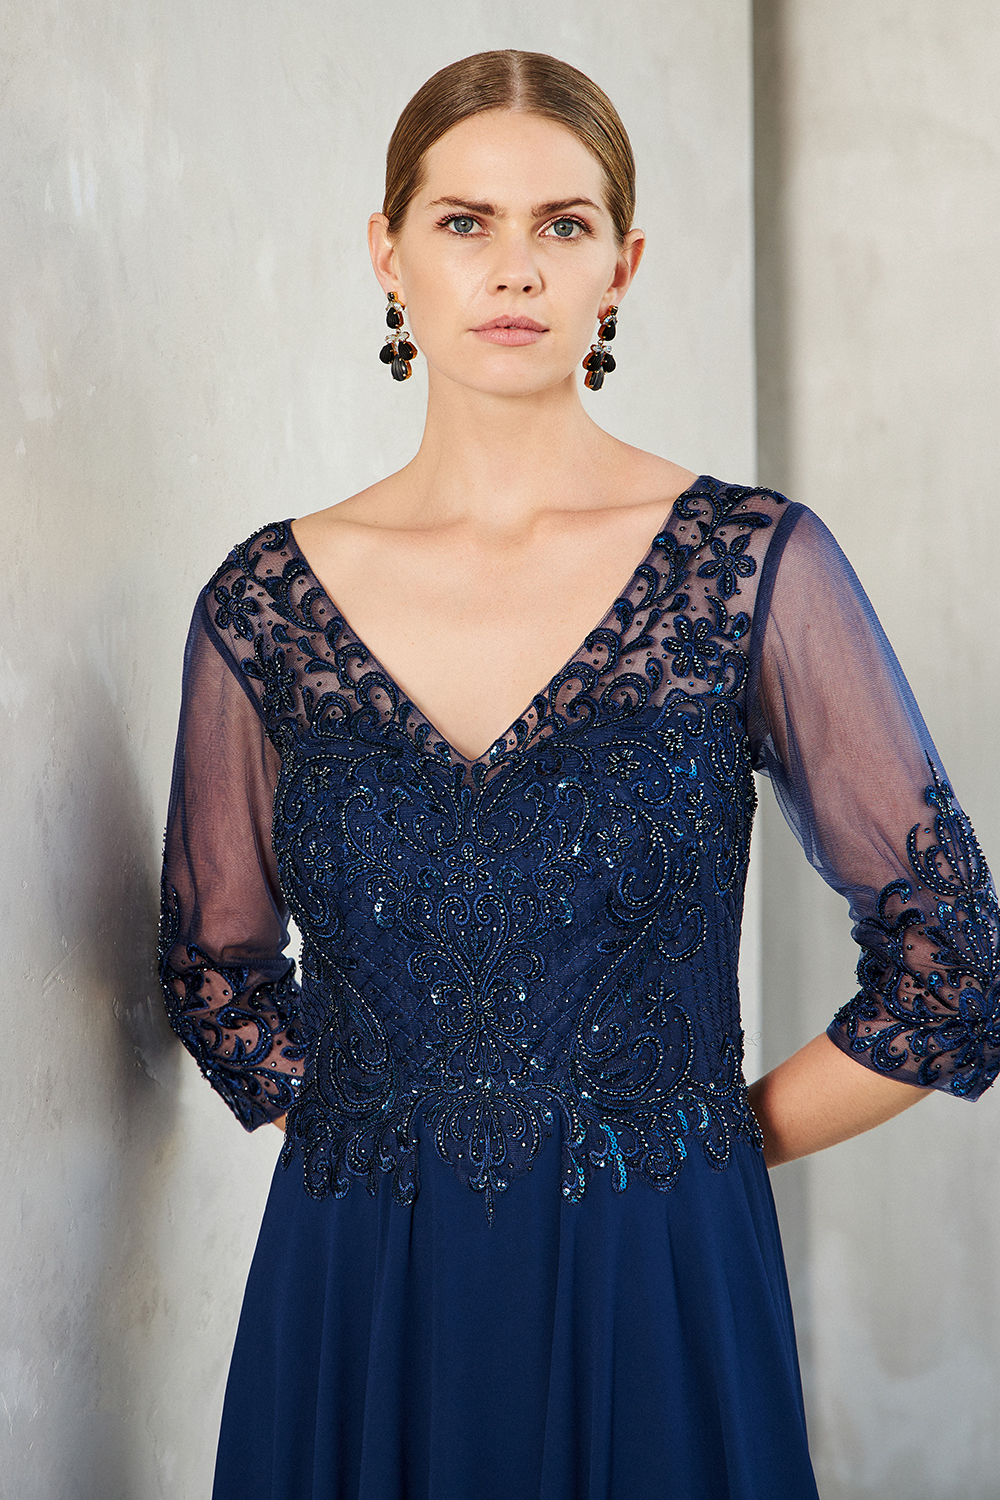 Long evening dress with chiffon fabric, lace and beading at the top and long sleeves